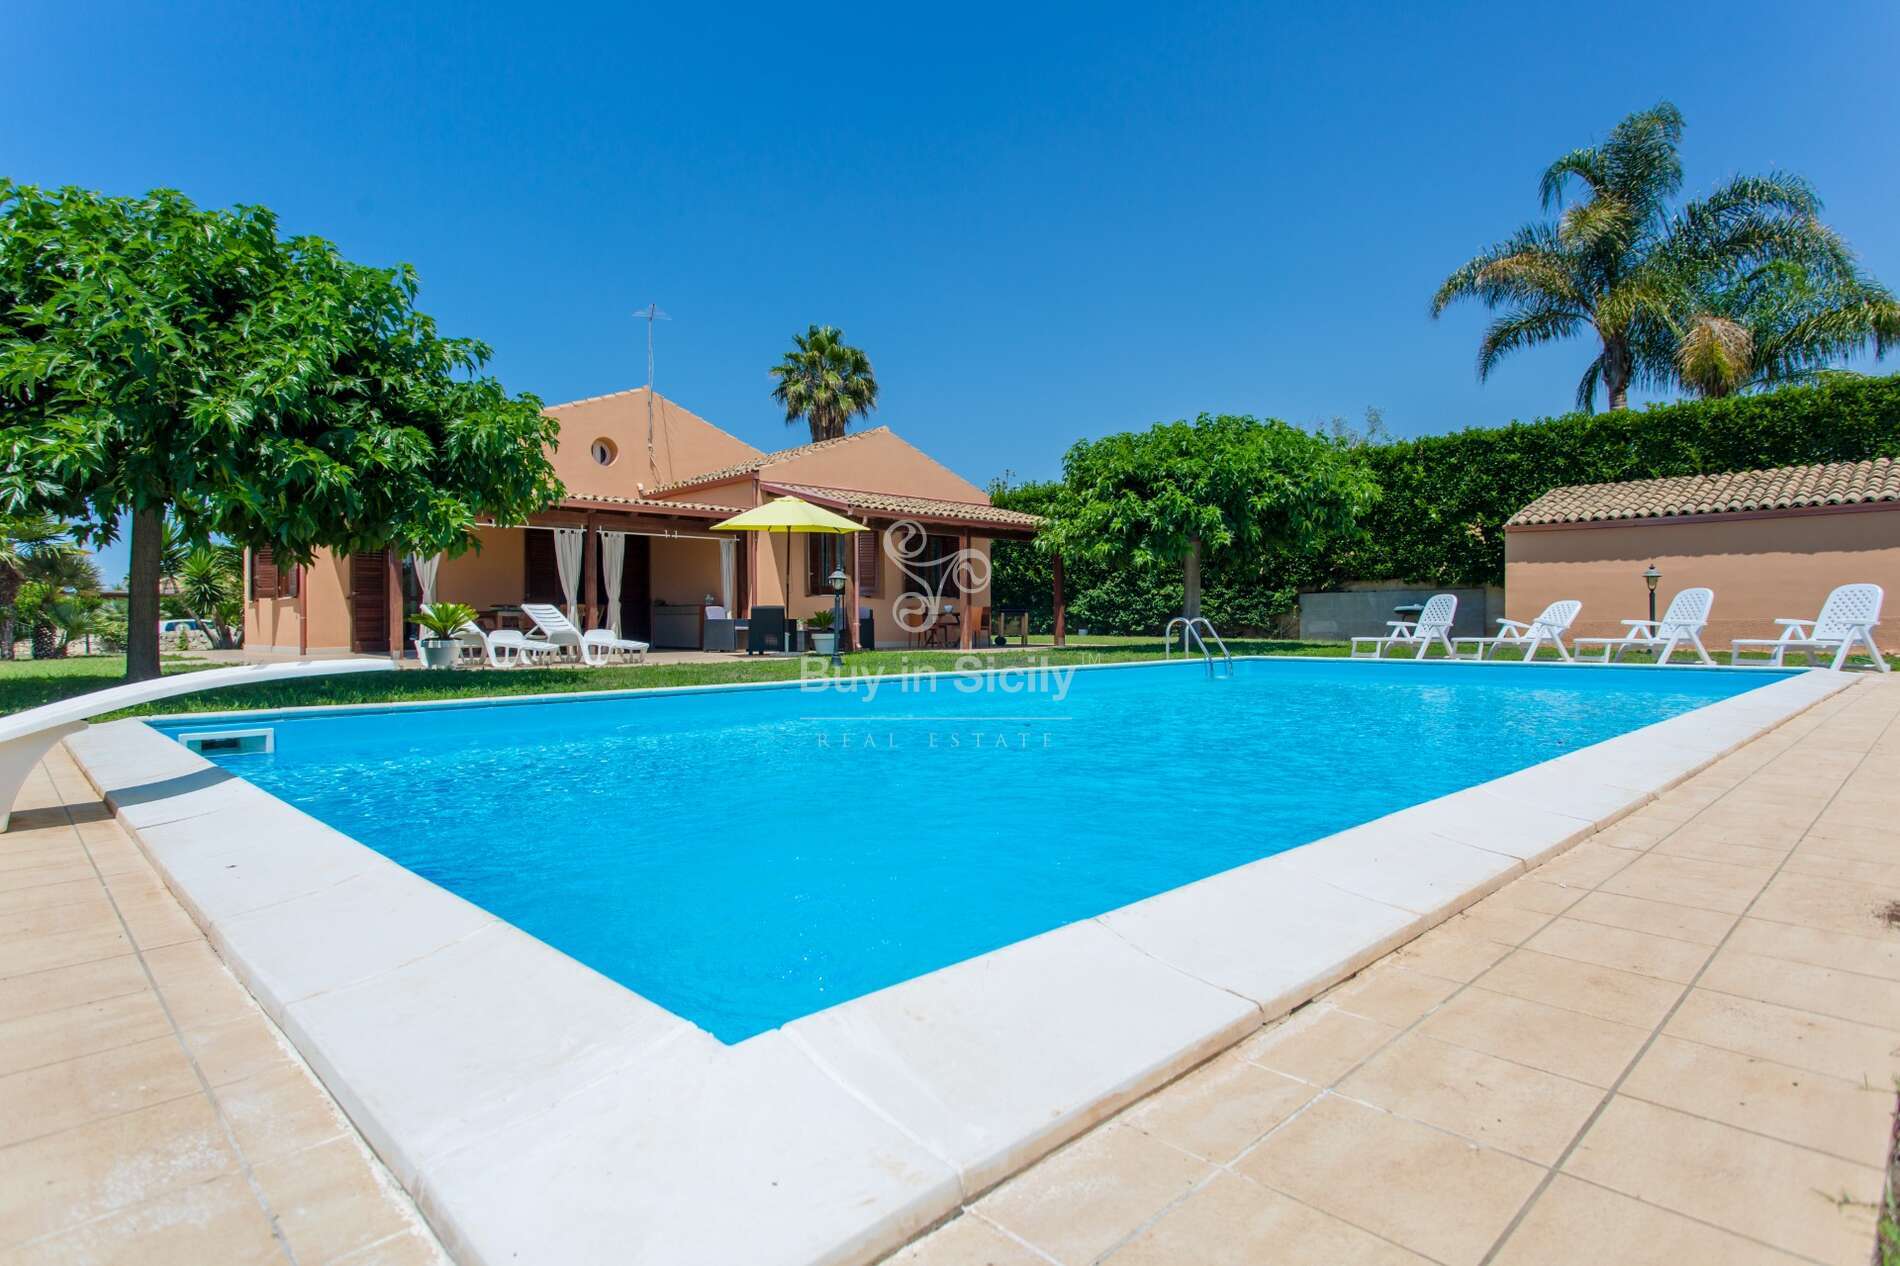 Lovely villa, with a large private garden and swimming pool, located near Playa Grande RG